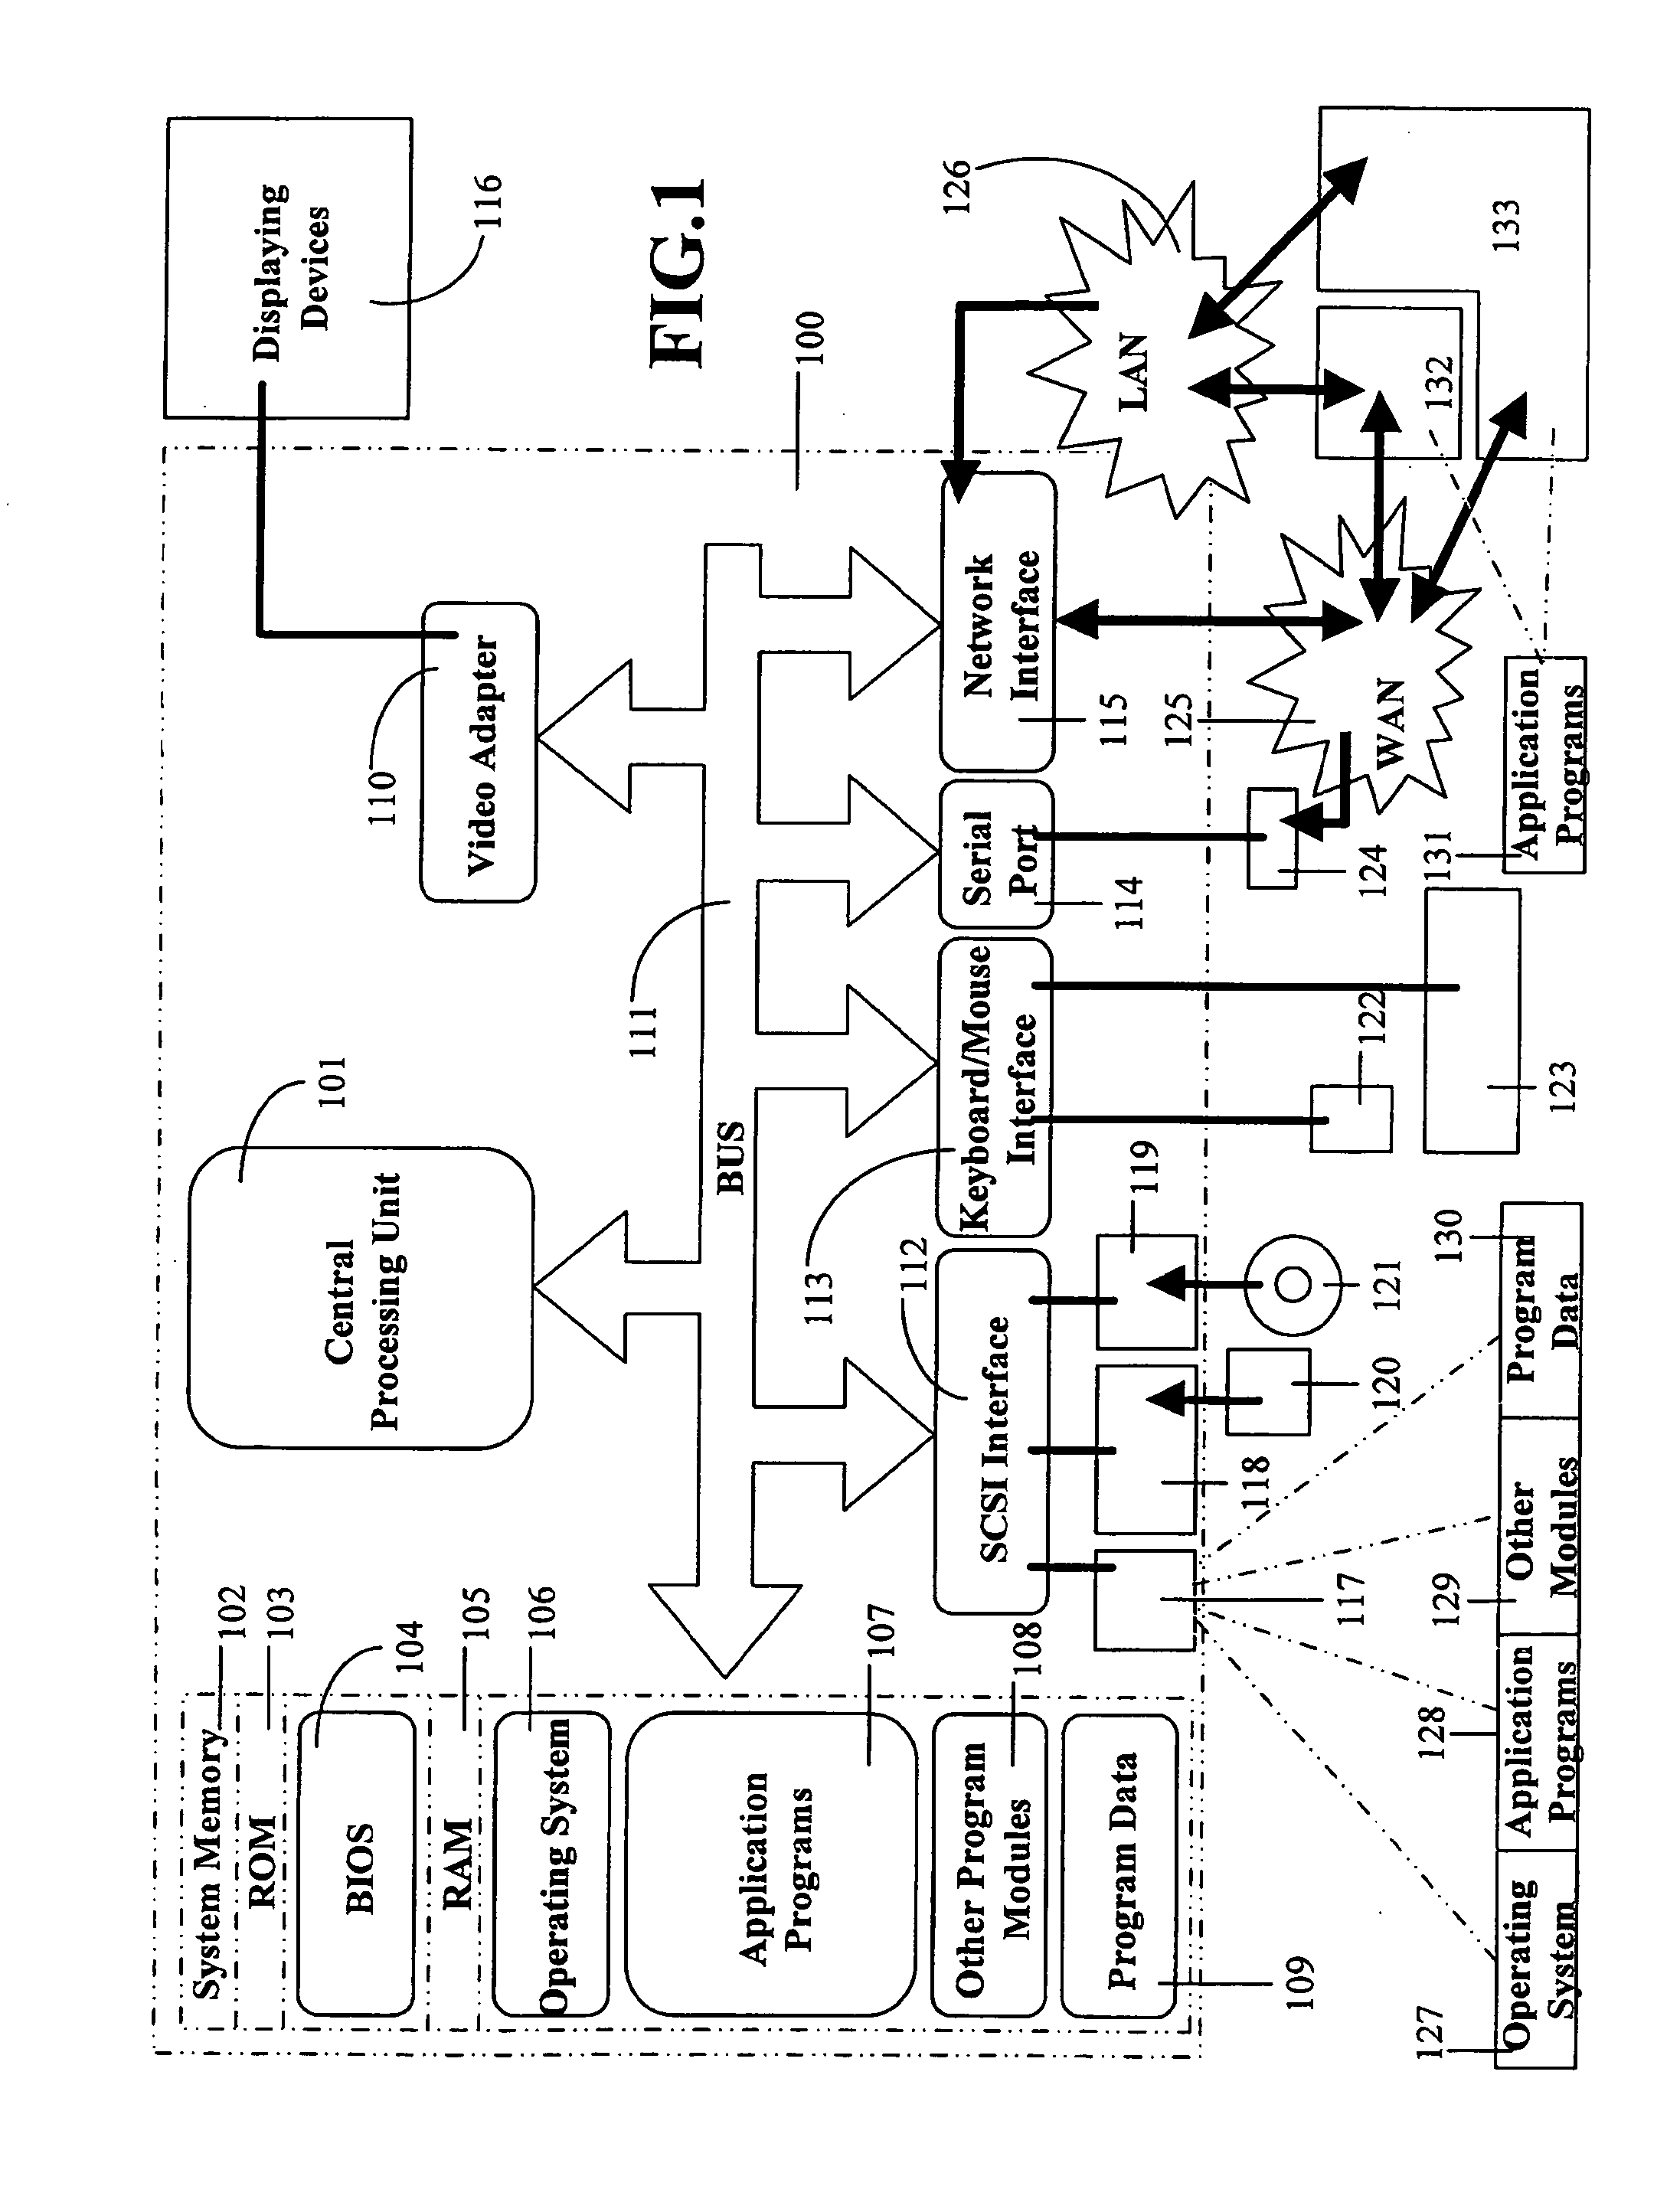 System and method for distributed analysis of patient records